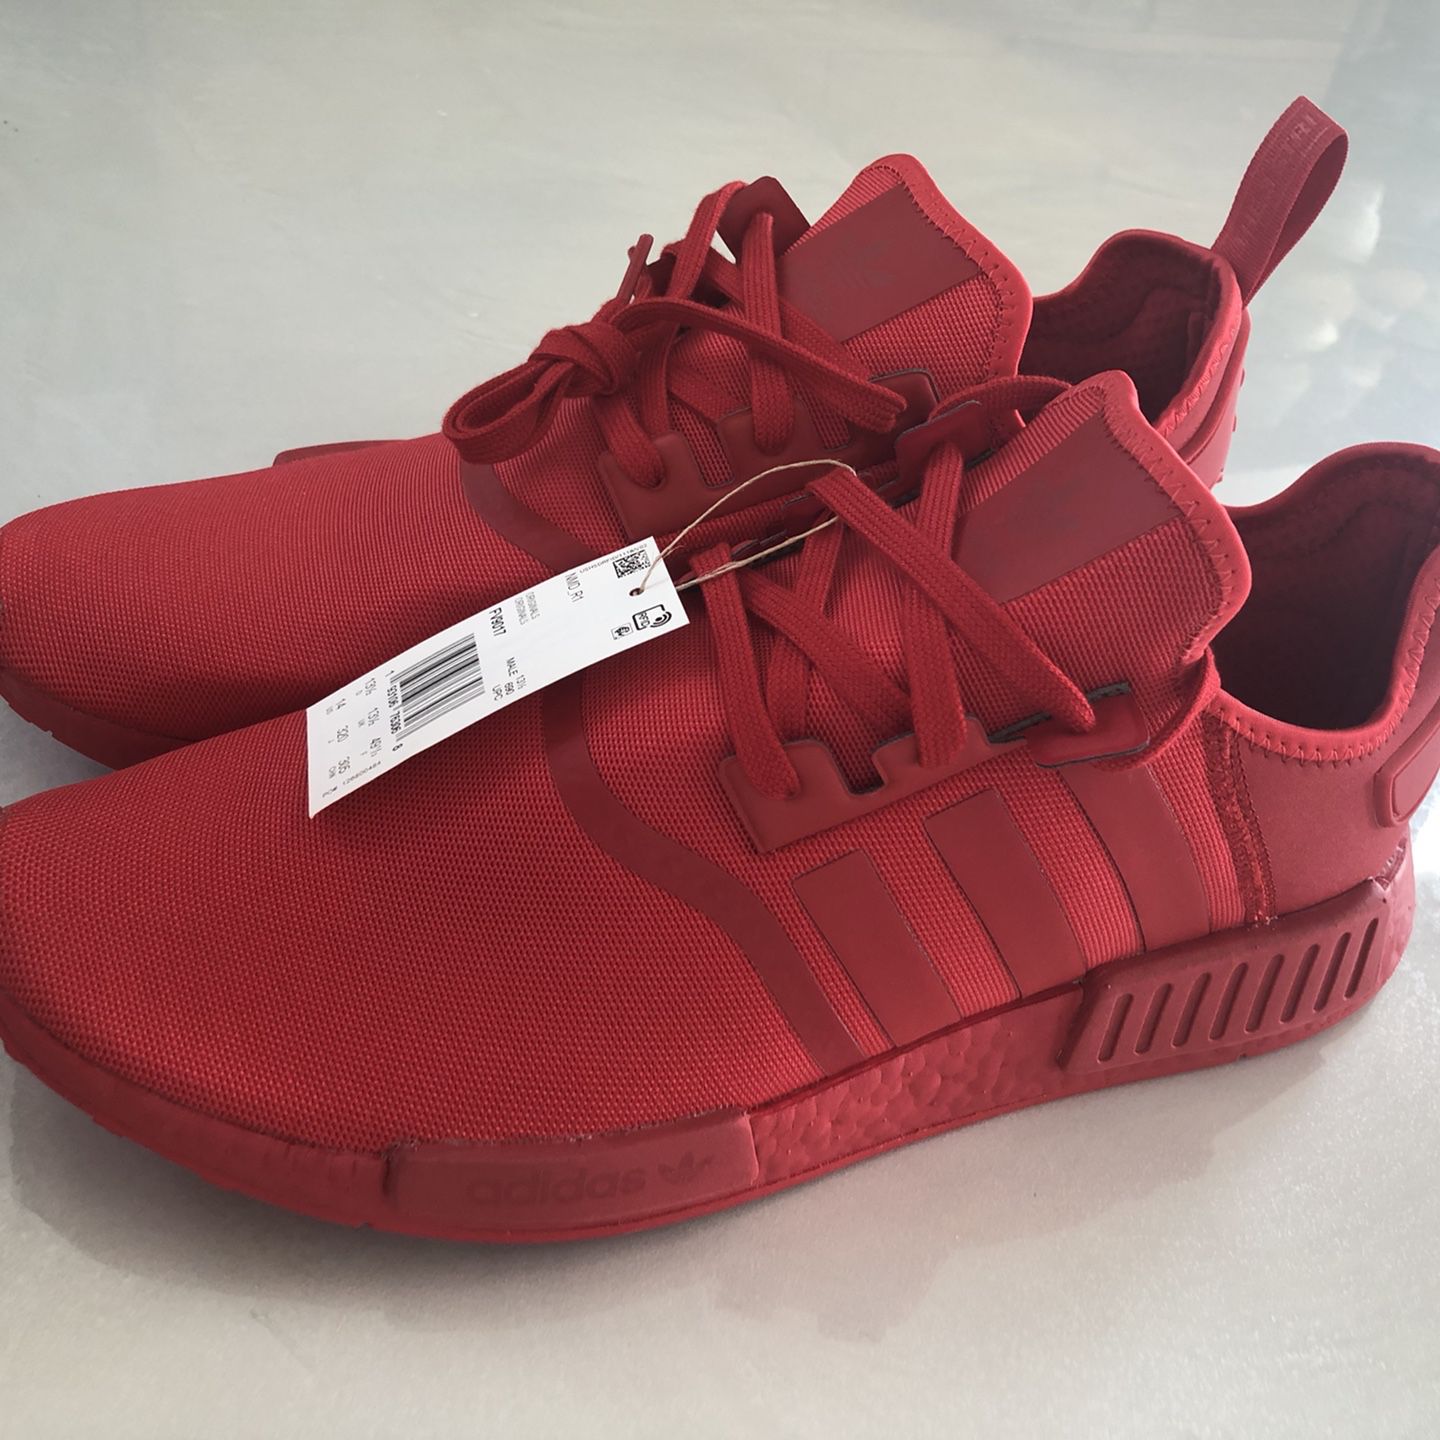 Adidas NMD R1 Triple RED - Size 14 - Brand New - No Box - With Tags